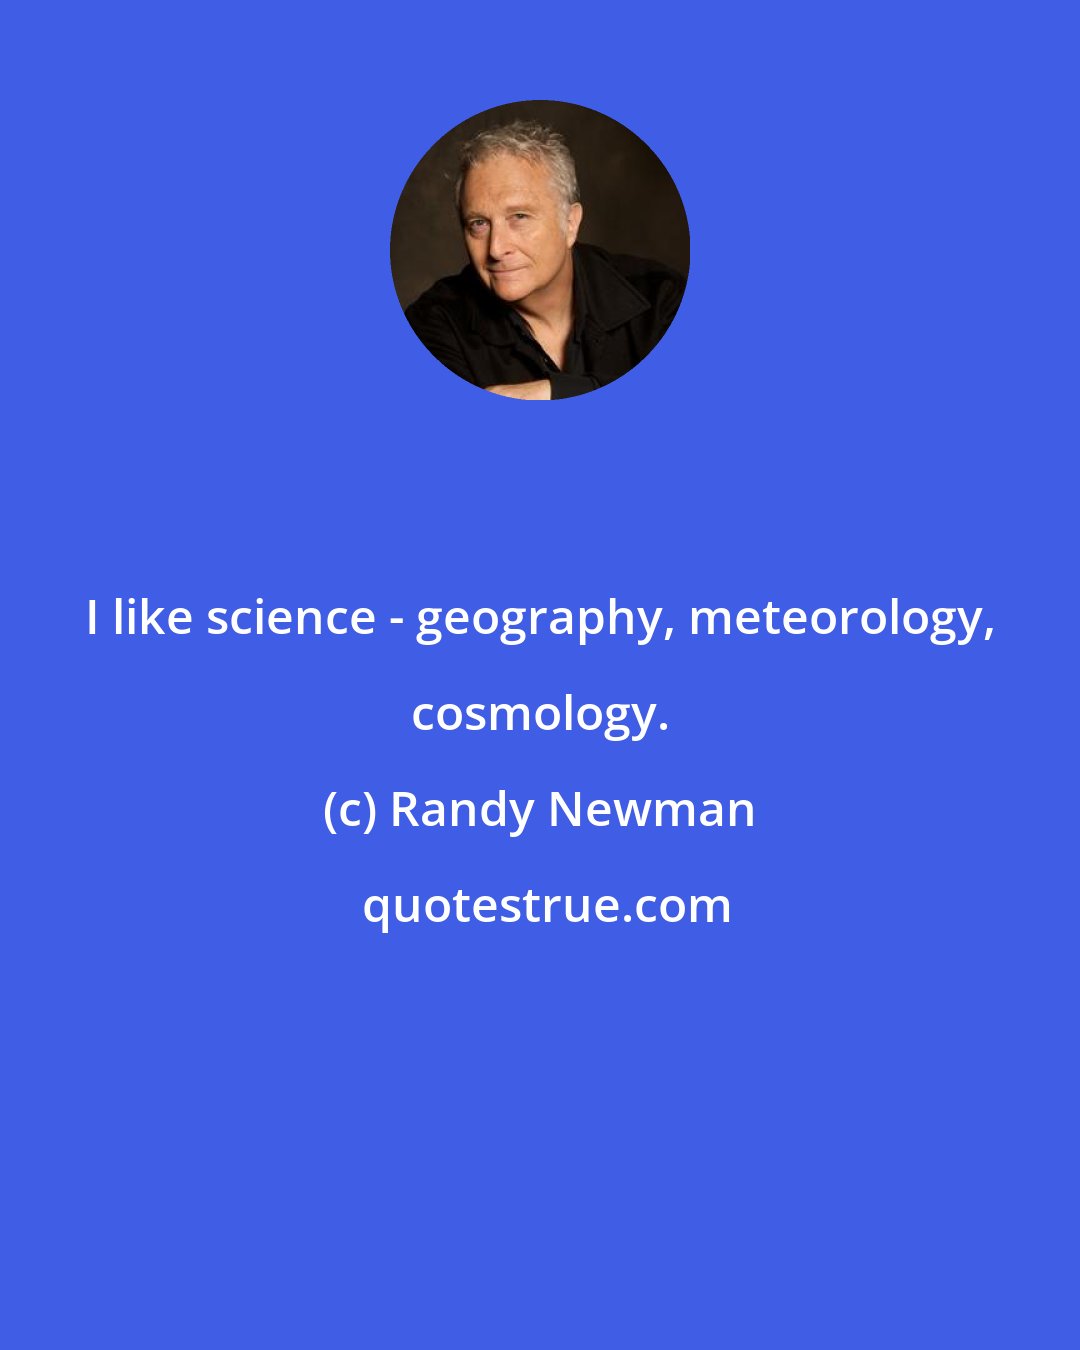 Randy Newman: I like science - geography, meteorology, cosmology.